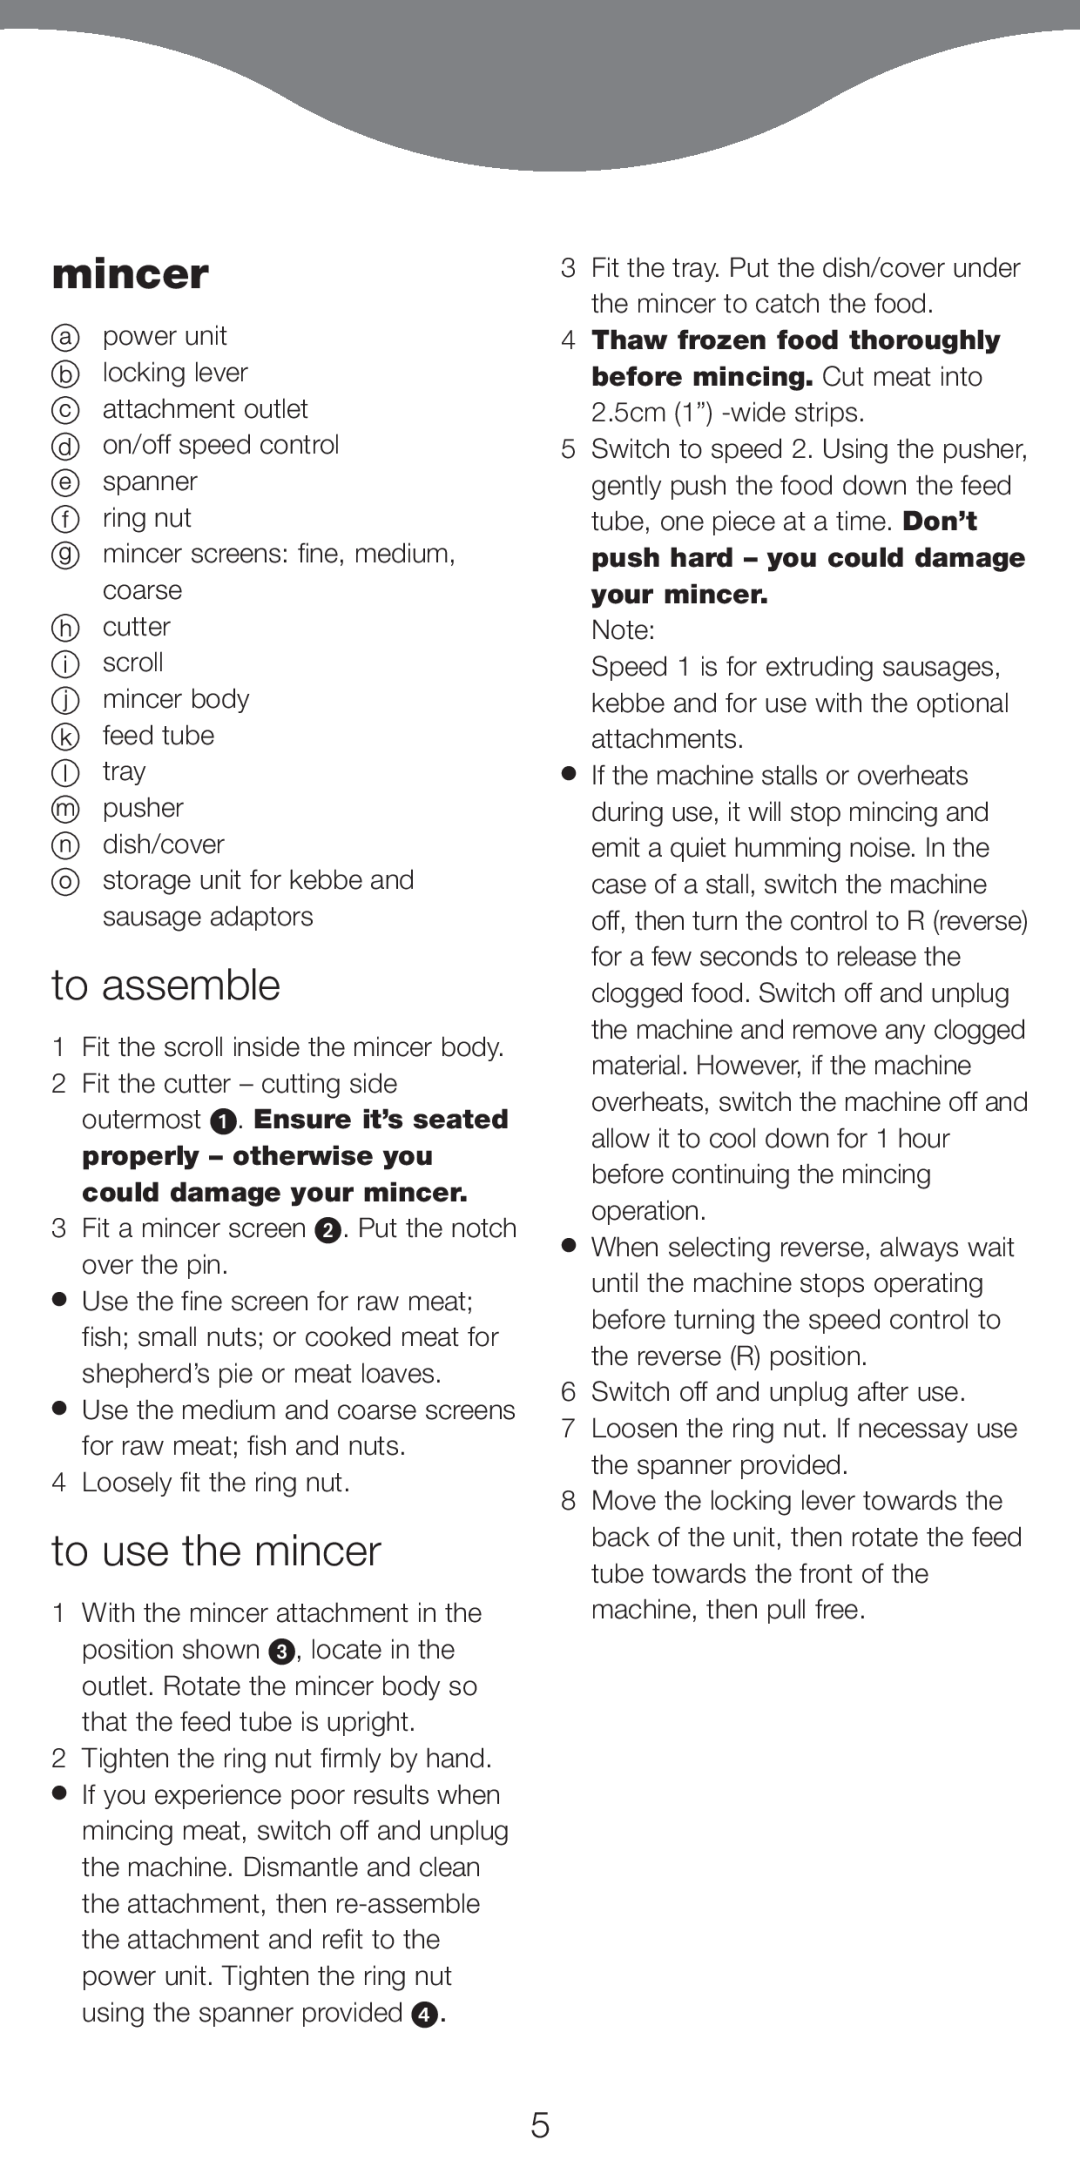 Kenwood MG700 manual to assemble, to use the mincer, properly - otherwise you could damage your mincer 